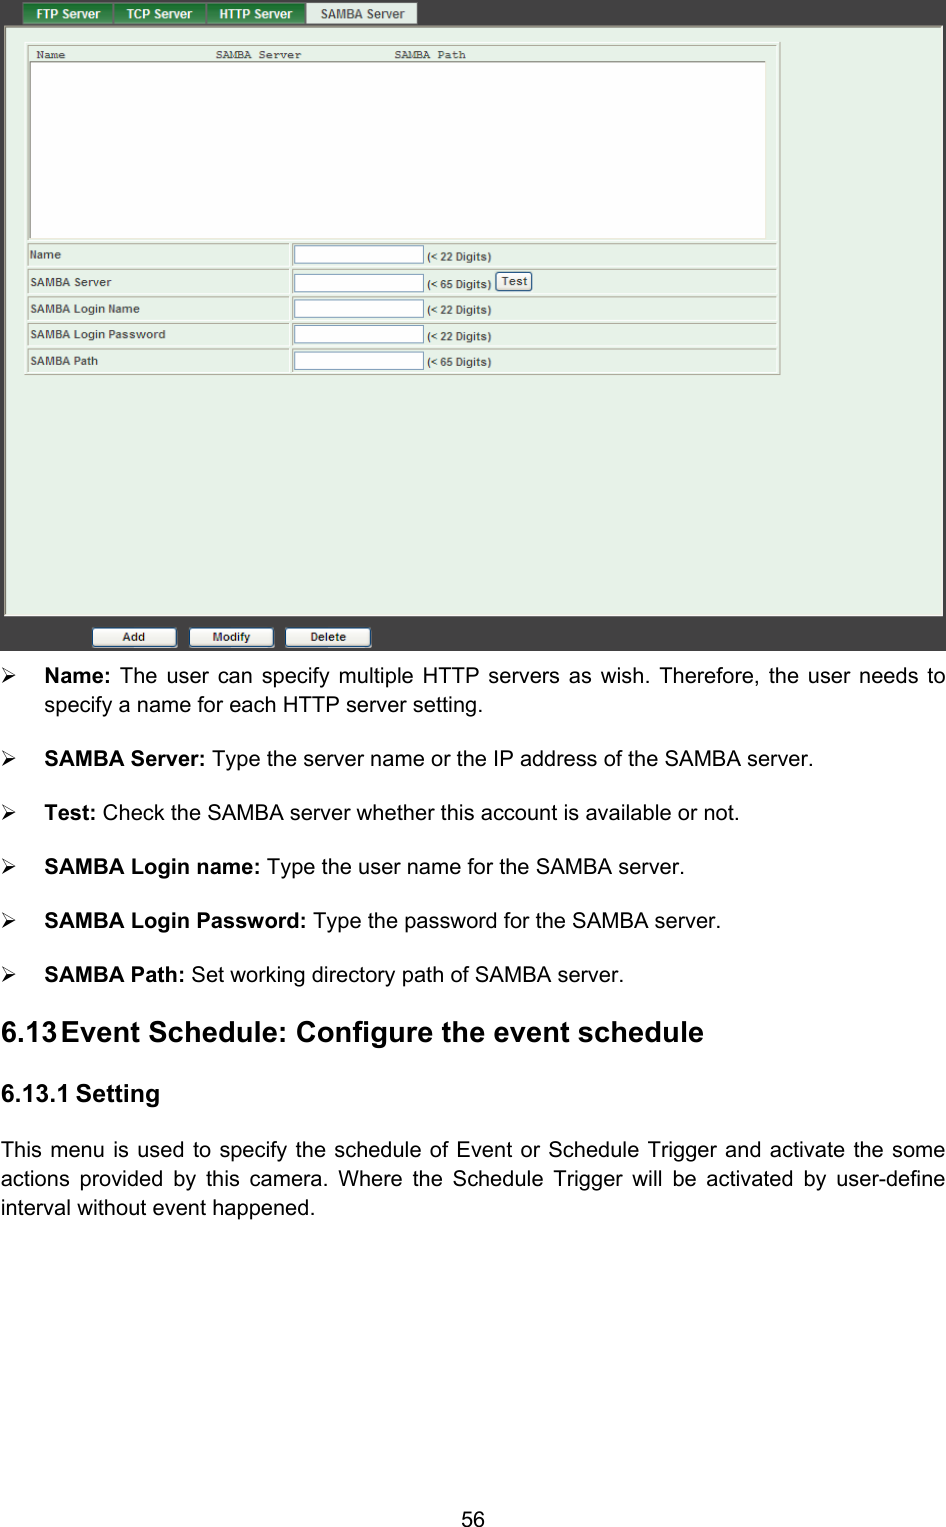  56  ¾ Name:  The user can specify multiple HTTP servers as wish. Therefore, the user needs to specify a name for each HTTP server setting.   ¾ SAMBA Server: Type the server name or the IP address of the SAMBA server.   ¾ Test: Check the SAMBA server whether this account is available or not.   ¾ SAMBA Login name: Type the user name for the SAMBA server.   ¾ SAMBA Login Password: Type the password for the SAMBA server.   ¾ SAMBA Path: Set working directory path of SAMBA server.   6.13 Event Schedule: Configure the event schedule   6.13.1 Setting This menu is used to specify the schedule of Event or Schedule Trigger and activate the some actions provided by this camera. Where the Schedule Trigger will be activated by user-define interval without event happened. 